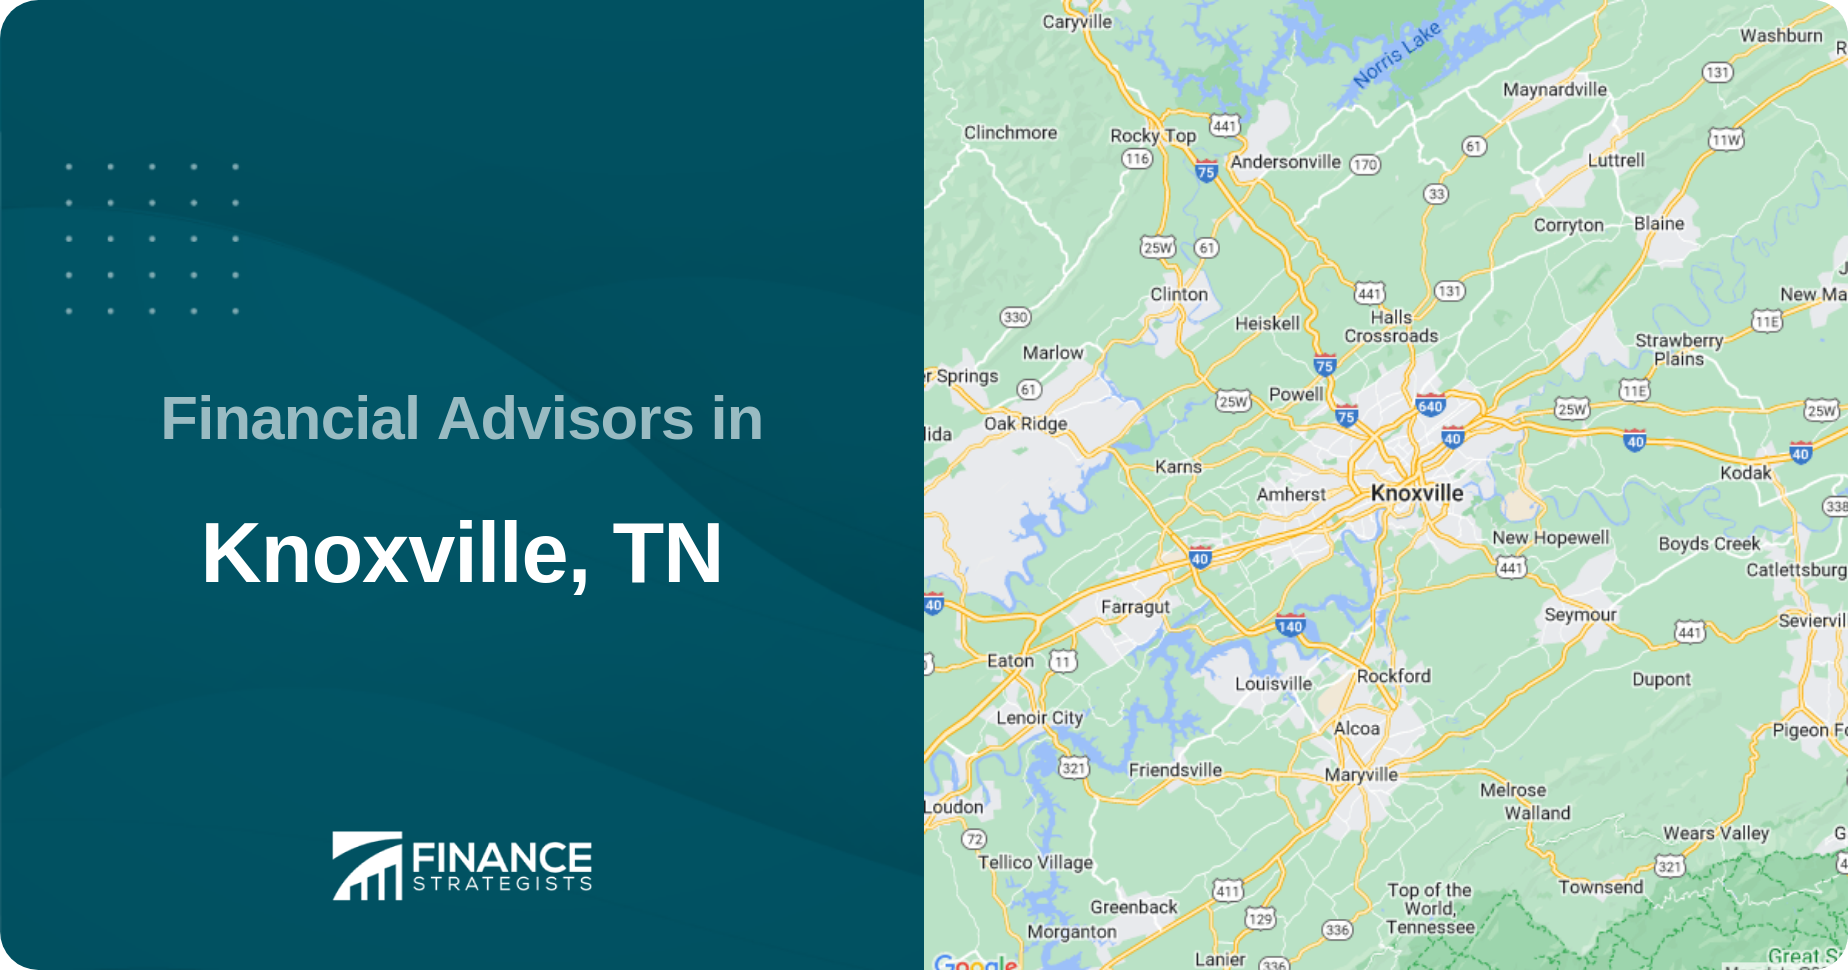 Financial Advisors in Knoxville, TN